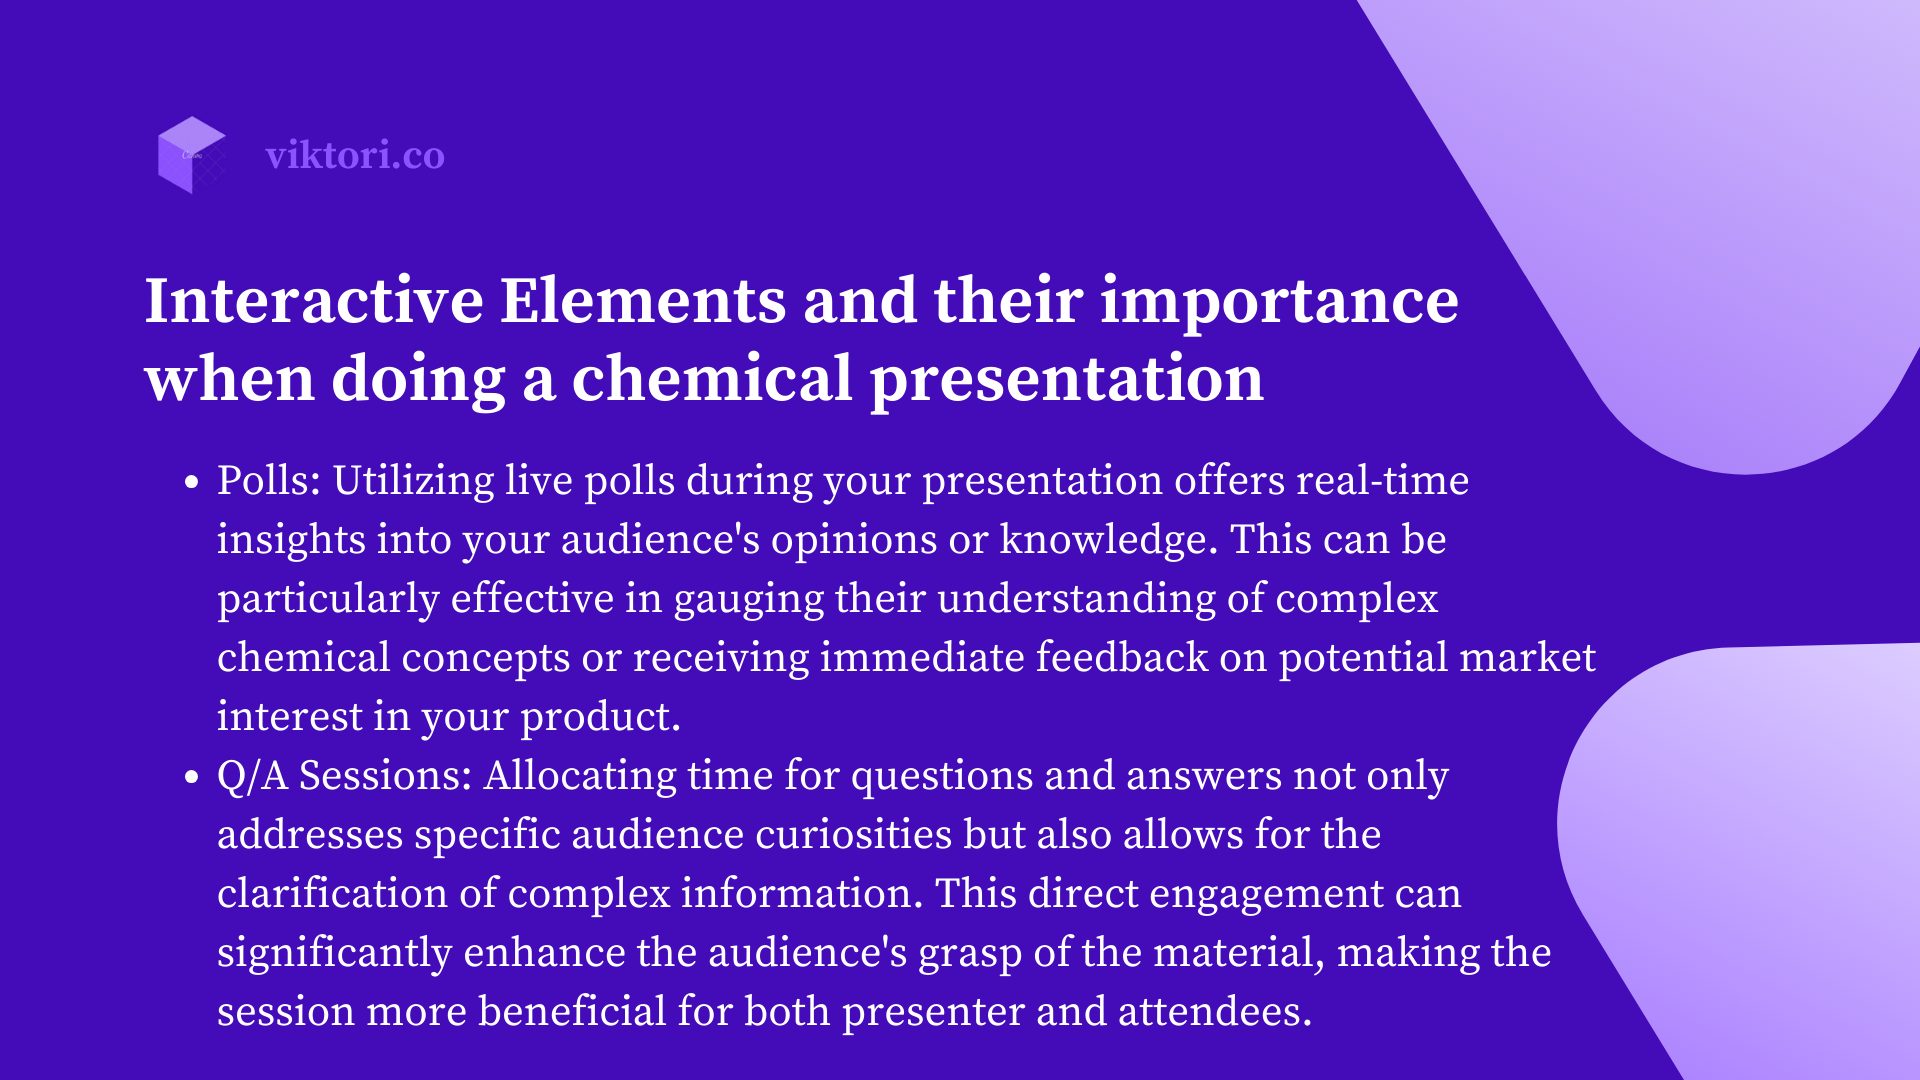 Interactive Elements and their importance when doing a chemical presentation